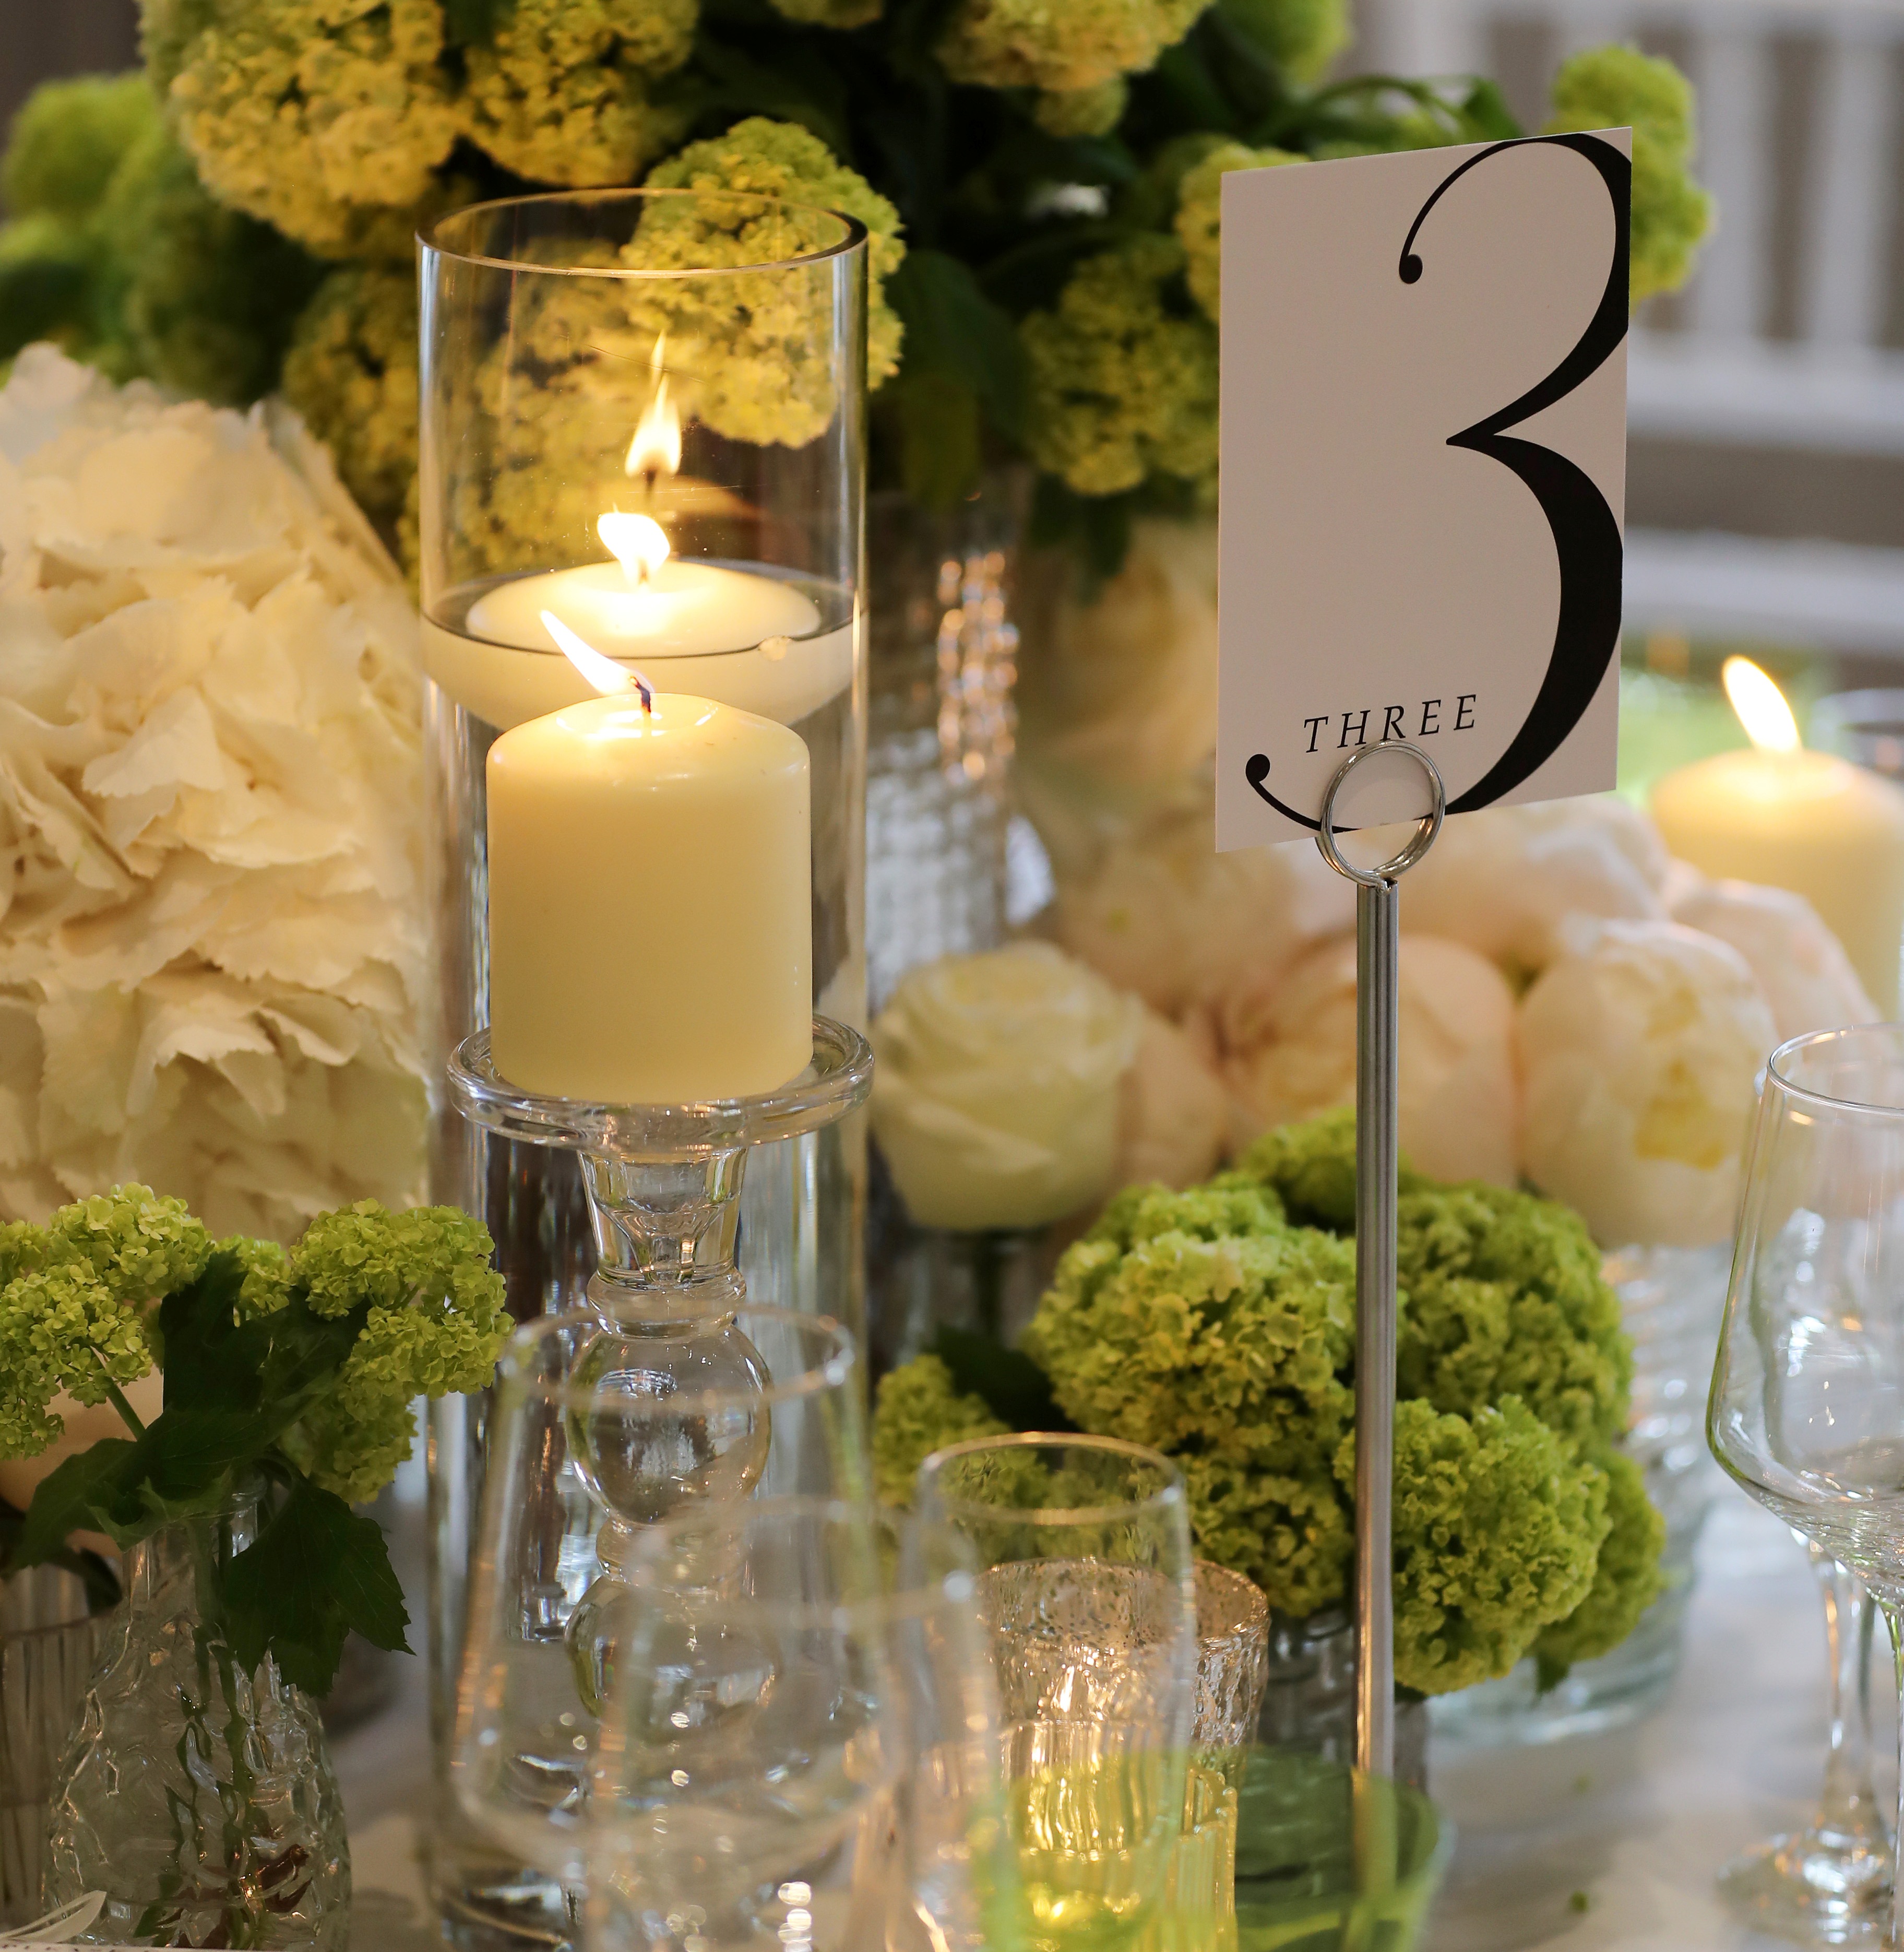 Adding all those little floral finishing touches not only make a fabulous first impression but leave lasting memories for you and your guests.